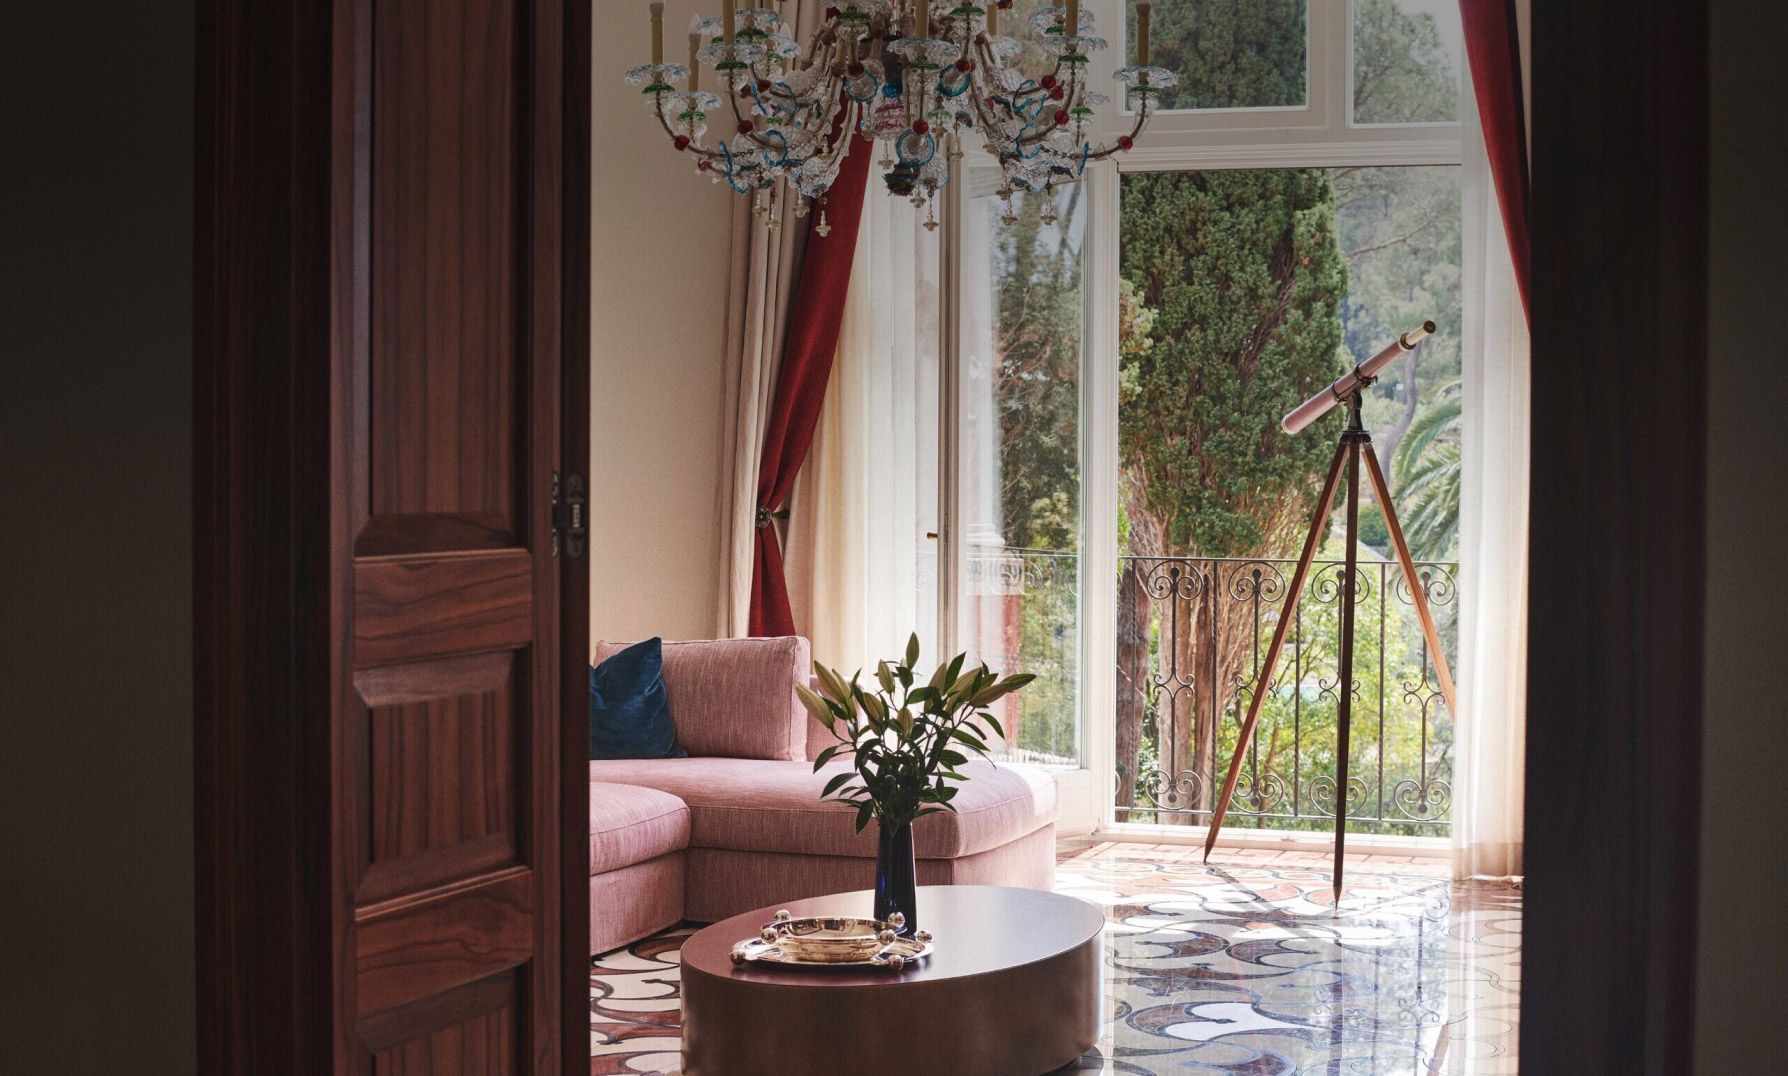 A plush pink sofa and ornate chandelier in a sunlit room, with a balcony door open to a garden view and a vintage telescope